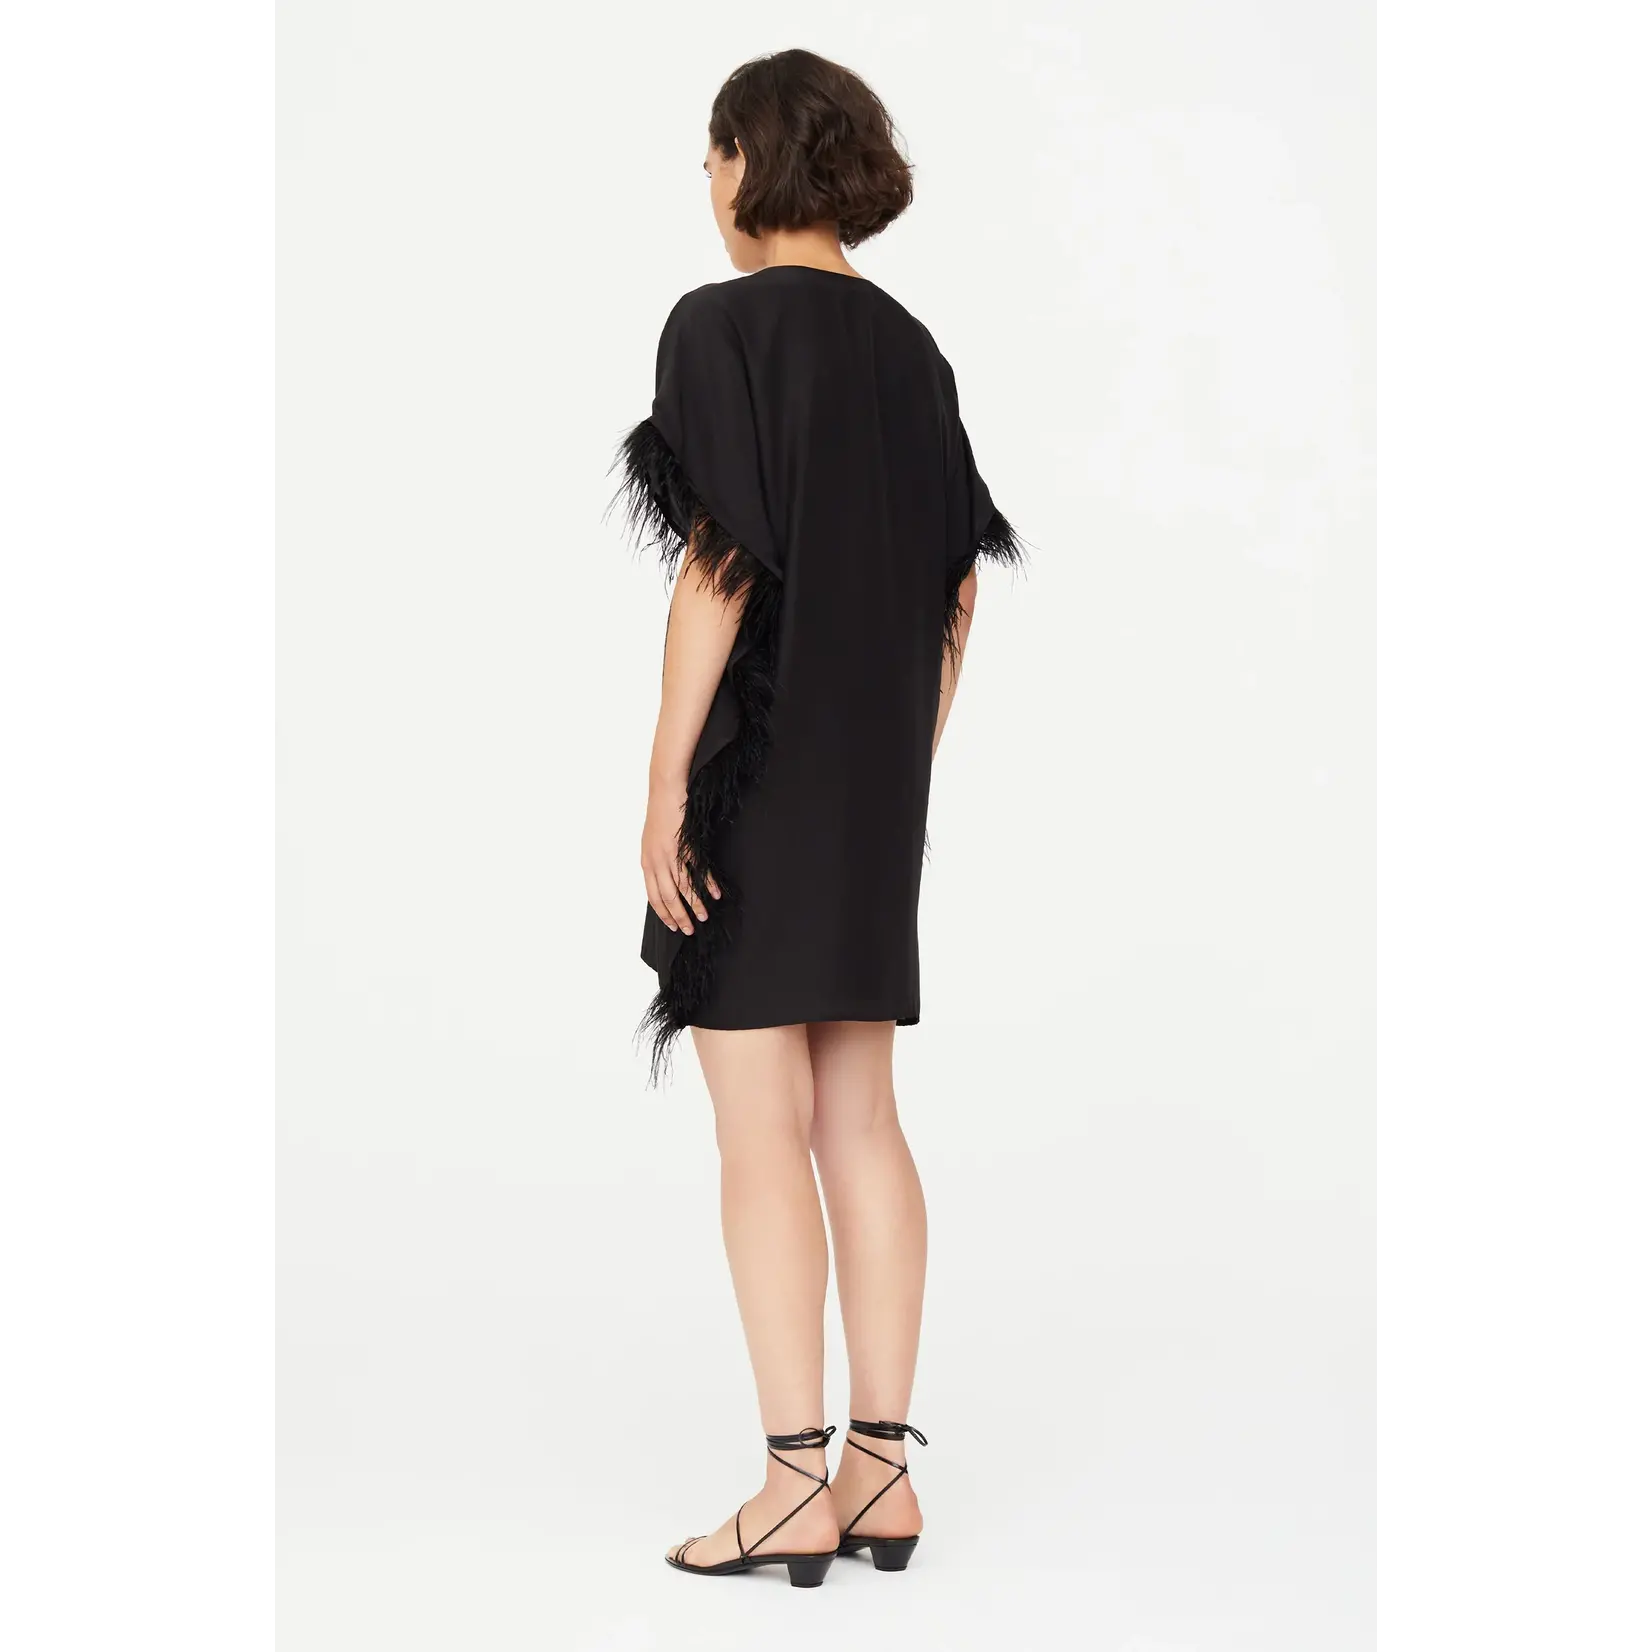 Marie Oliver Maura Feather Dress